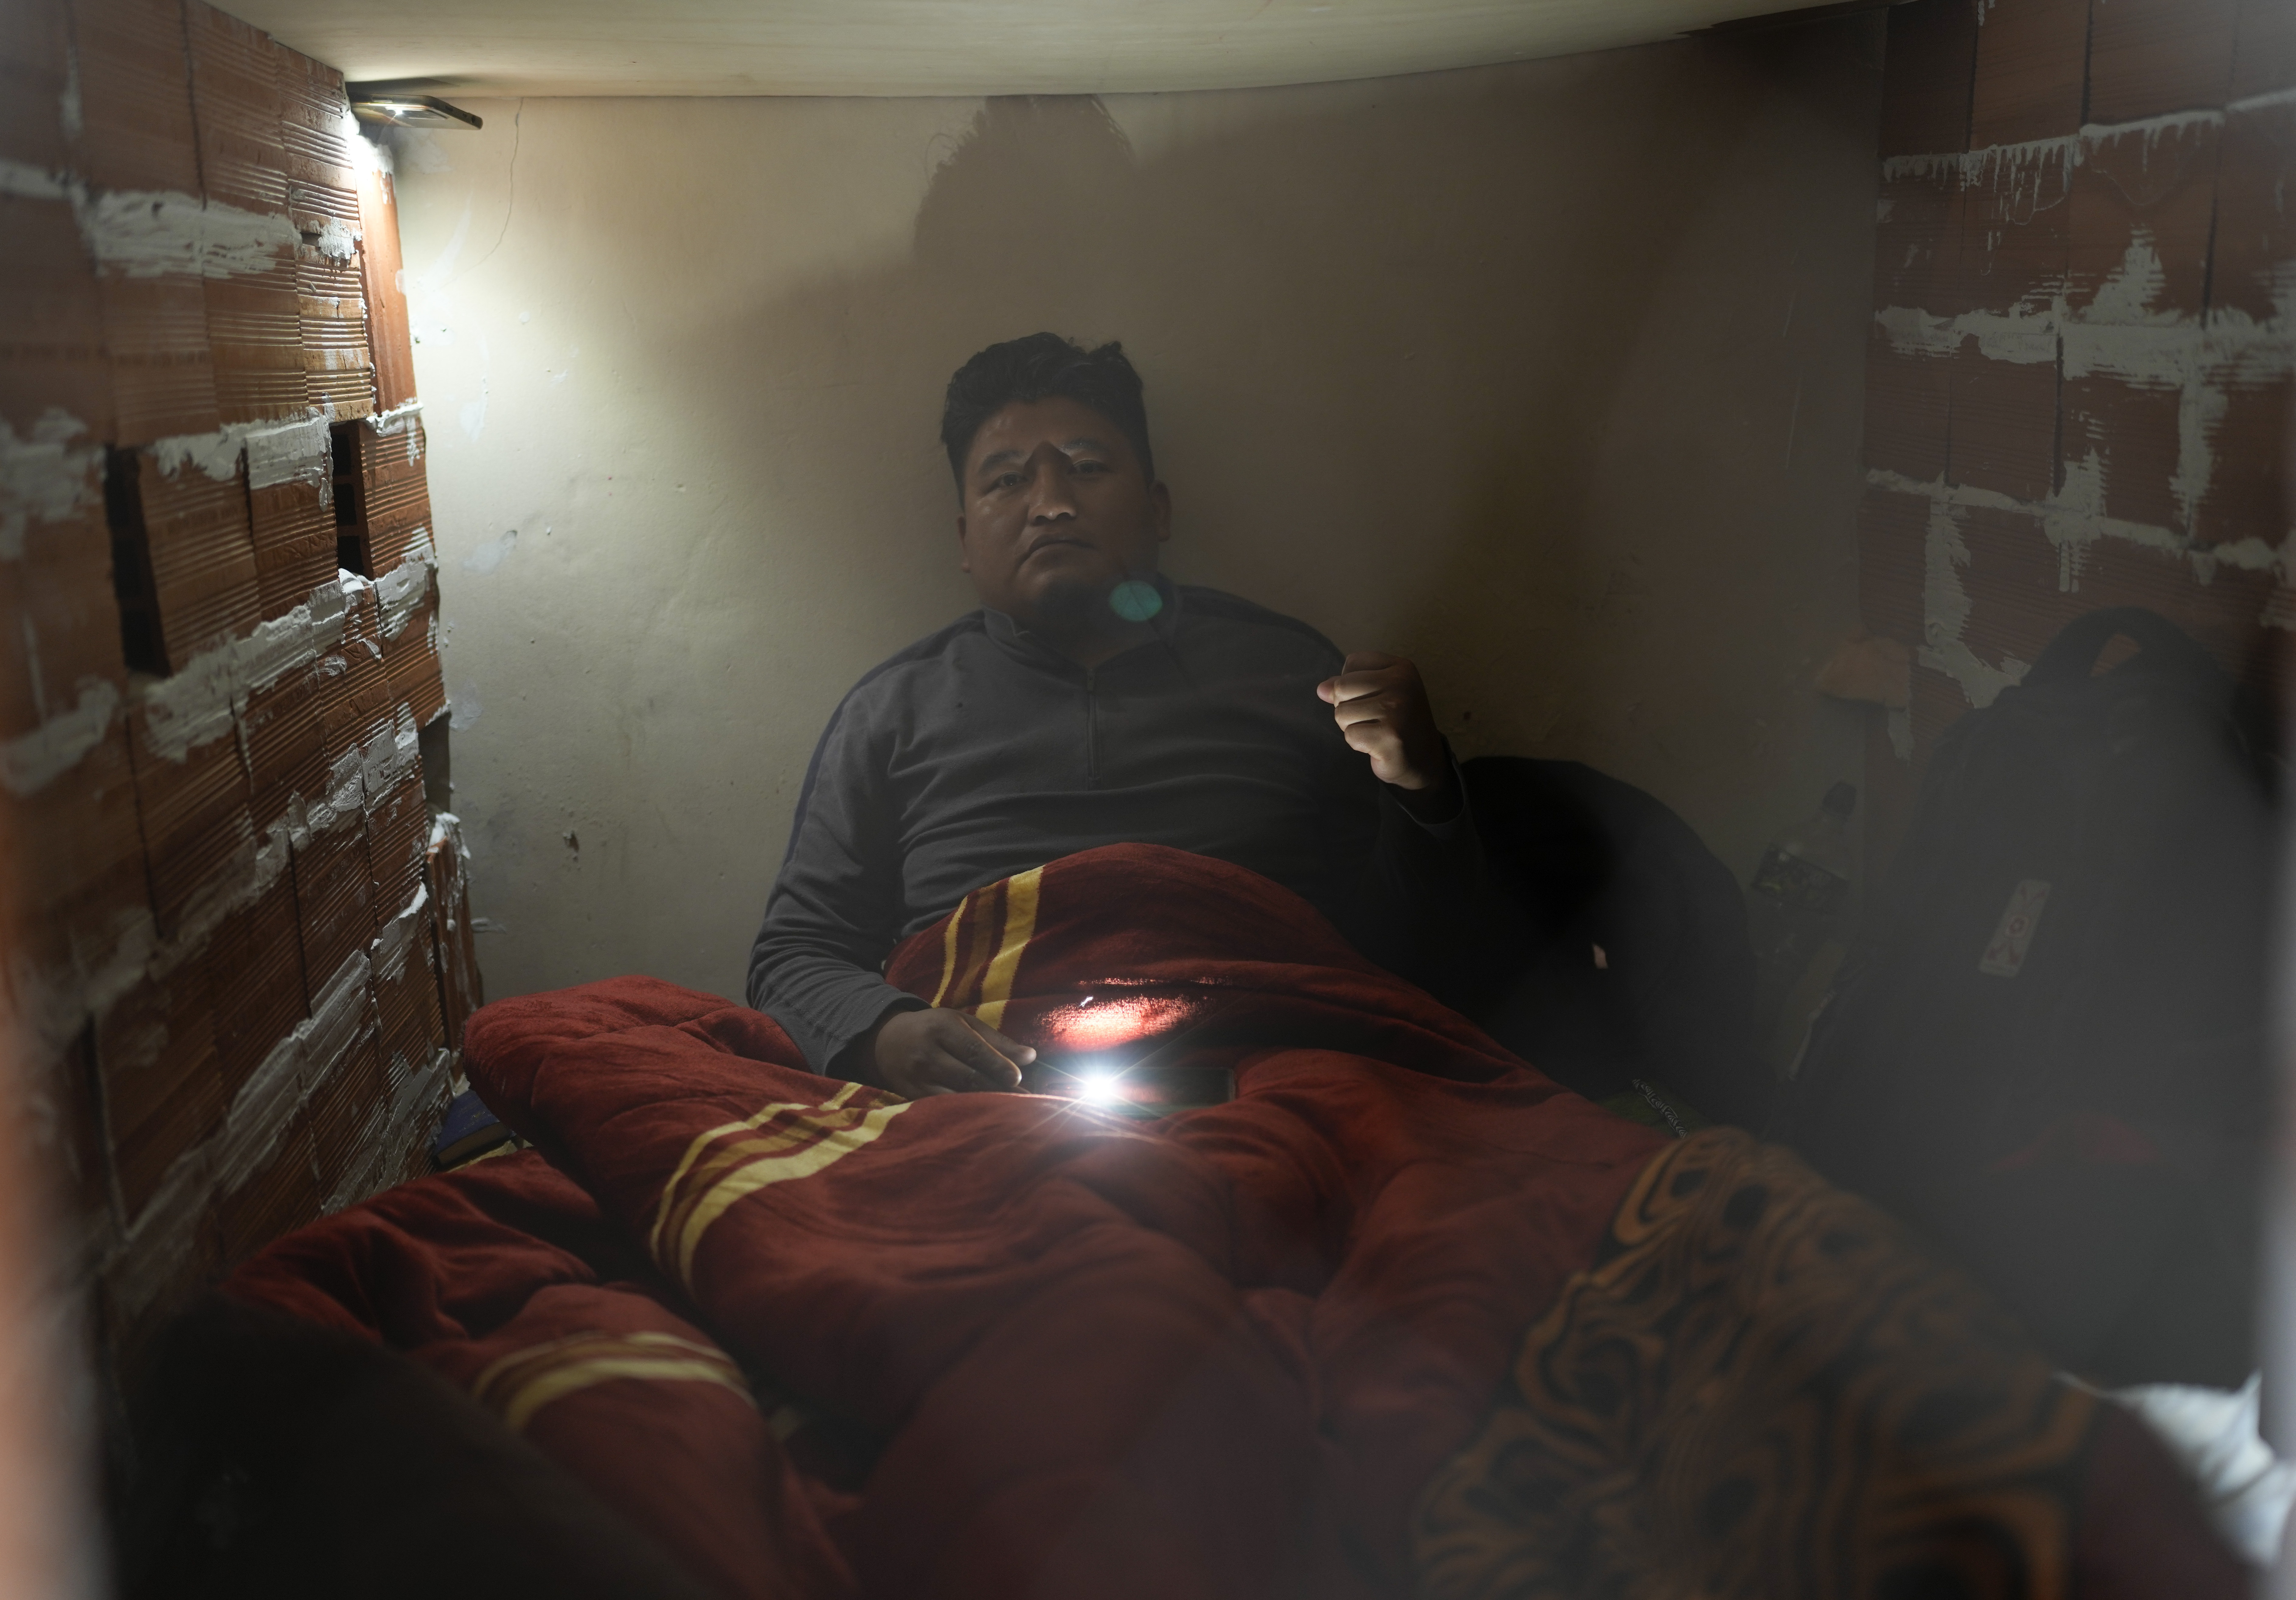 Wilfredo Ajllahuanca, inside the structure built by three educators on hunger strike who barricaded themselves inside the teachers' union headquarters, in La Paz, Bolivia, on May 2, 2023. The three leaders began the hunger strike on May 1 May after two months of protests by teachers demanding an increase in the budget for public education and a change in the new educational curriculum.  (AP Photo/Juan Karita)